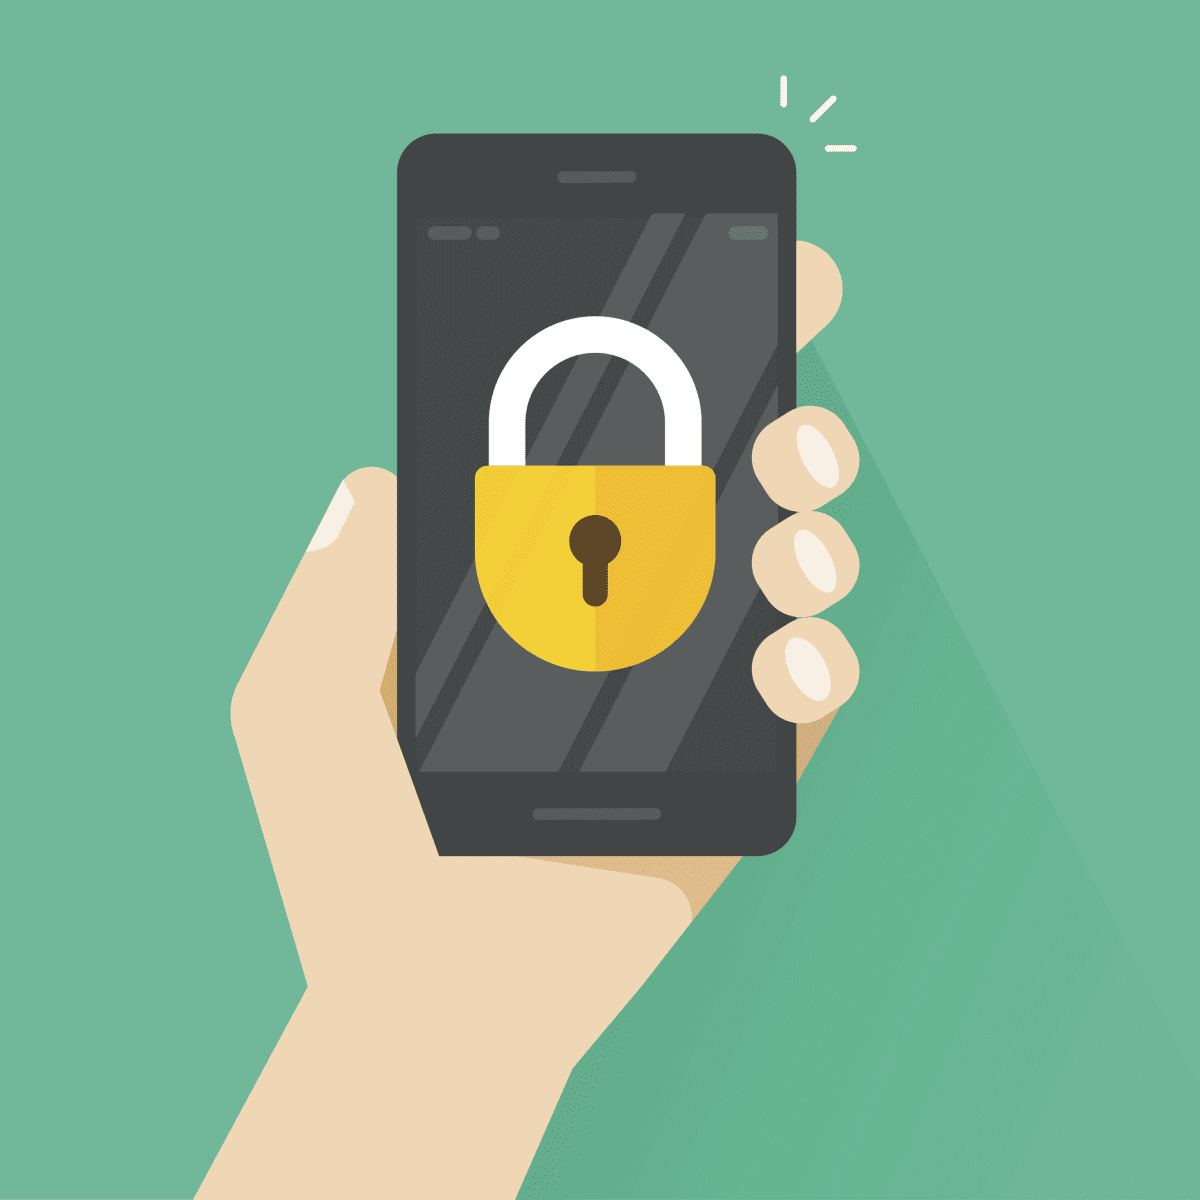 Smartphone in hand with lock icon on screen vector illustration, flat style locked mobile phone